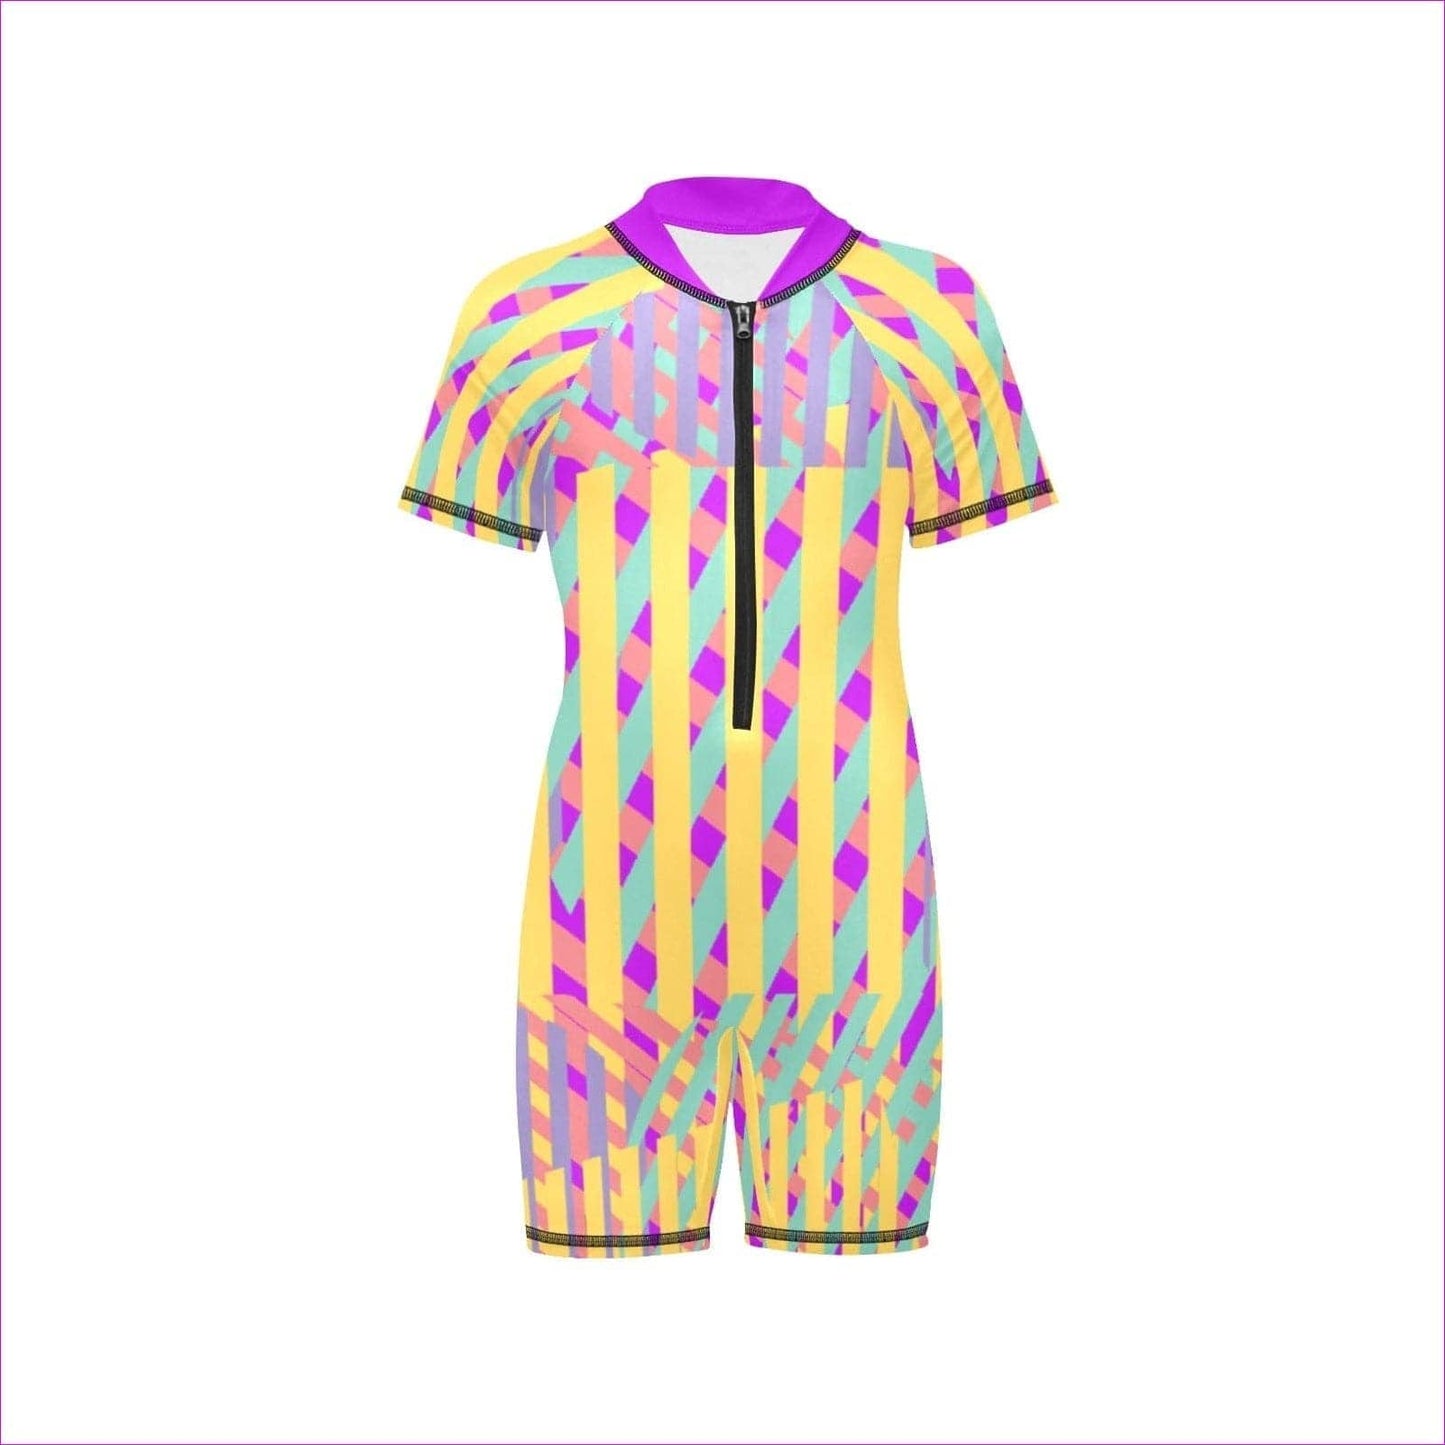 Vivid Weaved Girls Short Sleeve One-Piece Swimsuit - kid's swimsuit at TFC&H Co.